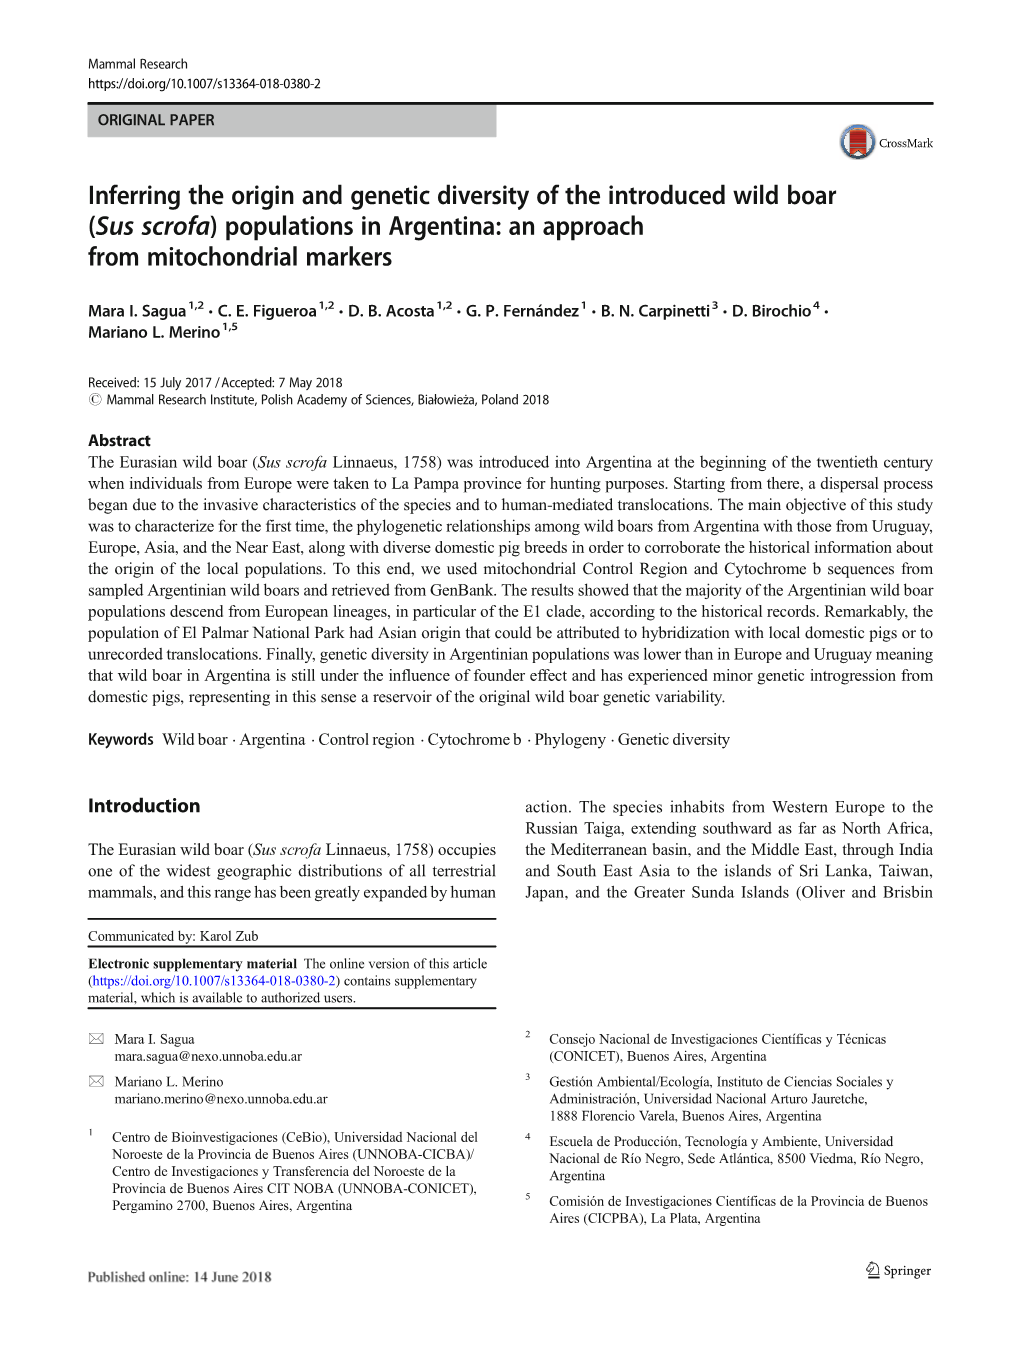 Inferring the Origin and Genetic Diversity of the Introduced Wild Boar (Sus Scrofa) Populations in Argentina: an Approach from Mitochondrial Markers